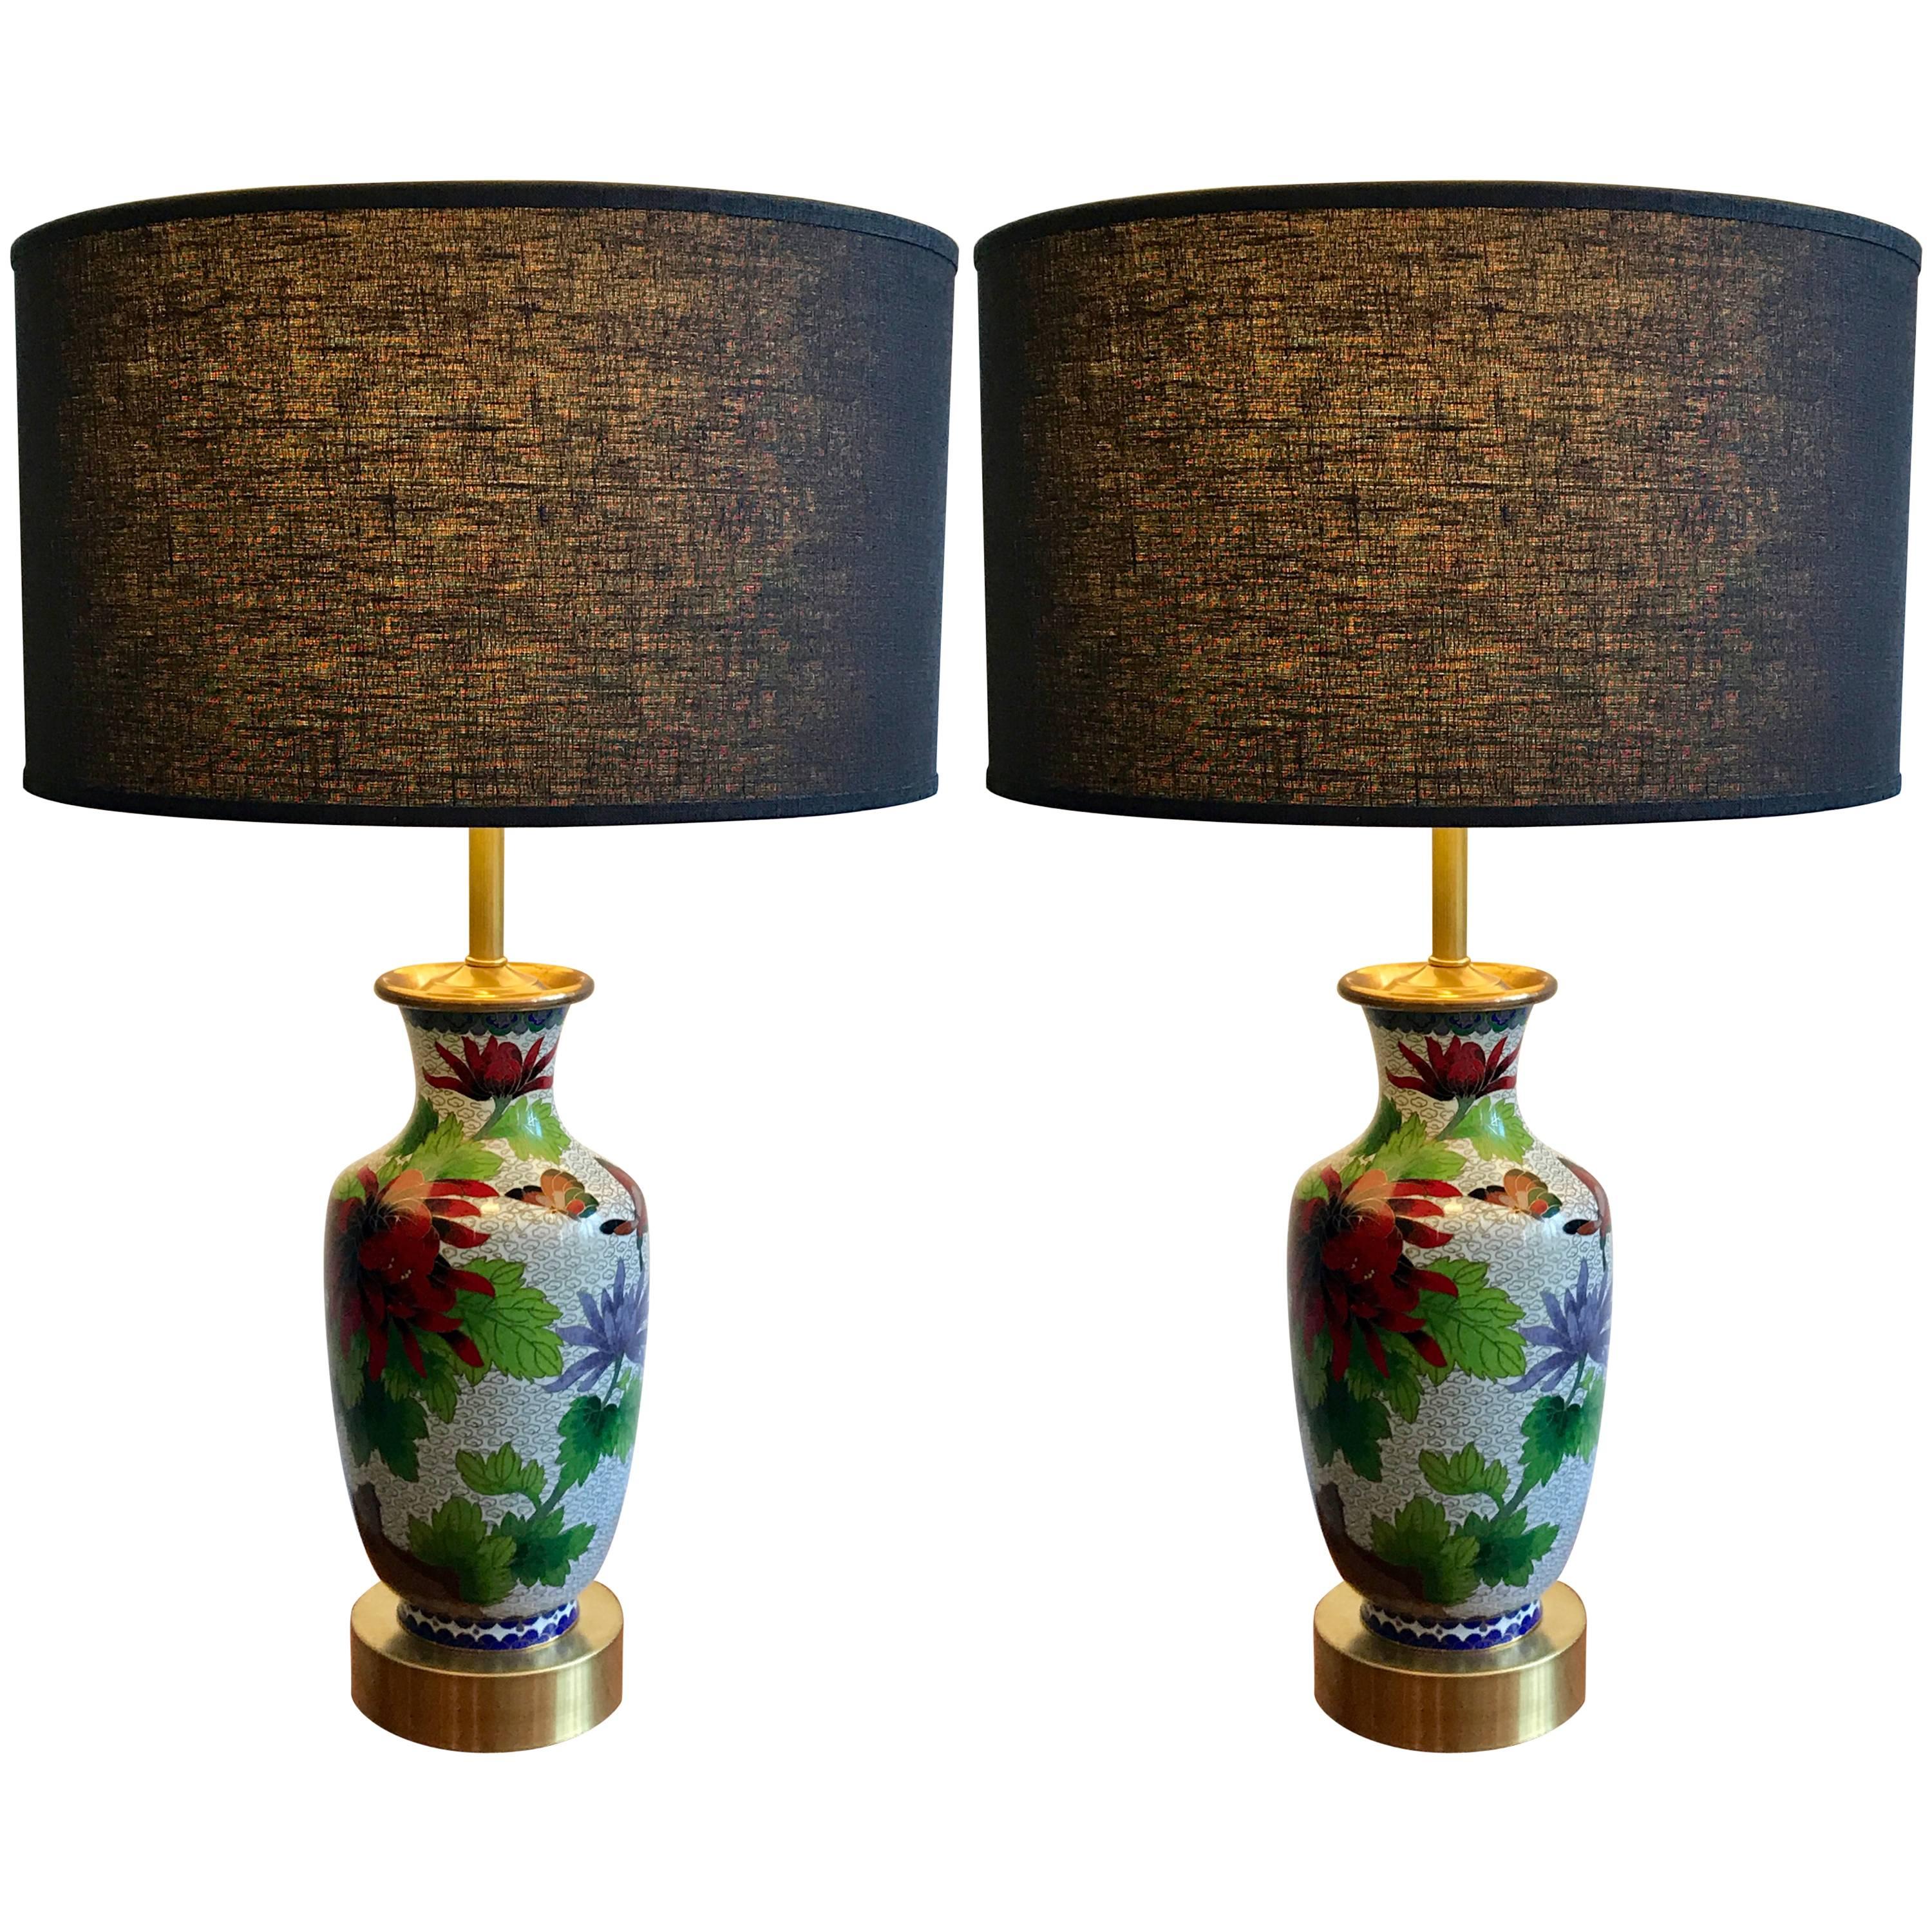 Exquisite Pair of White Antique Chinese Cloisonné Vase Table Lamps, 1950s